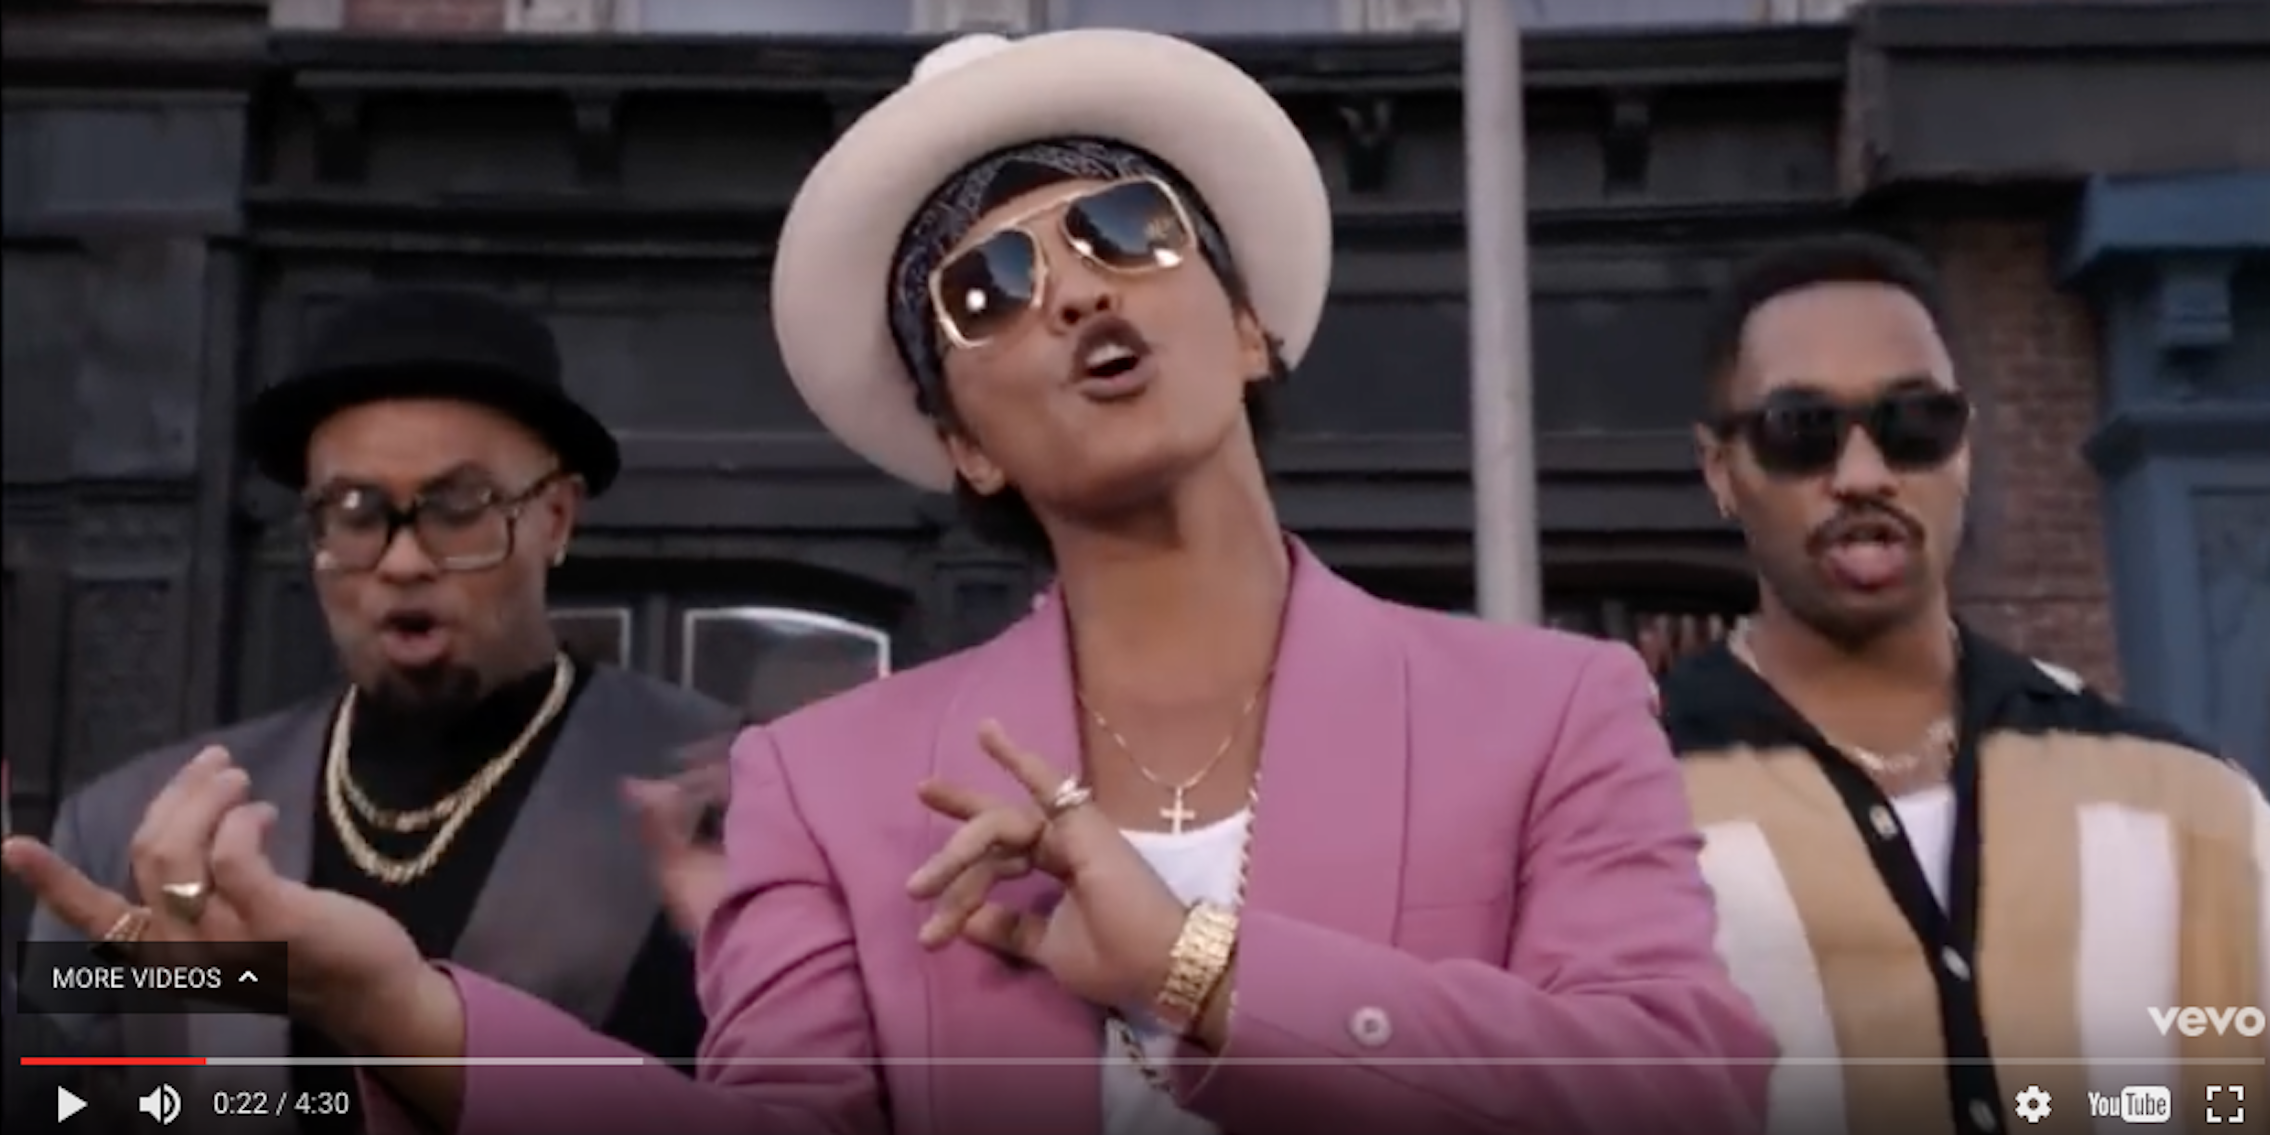 How to download YouTube videos: Uptown Funk